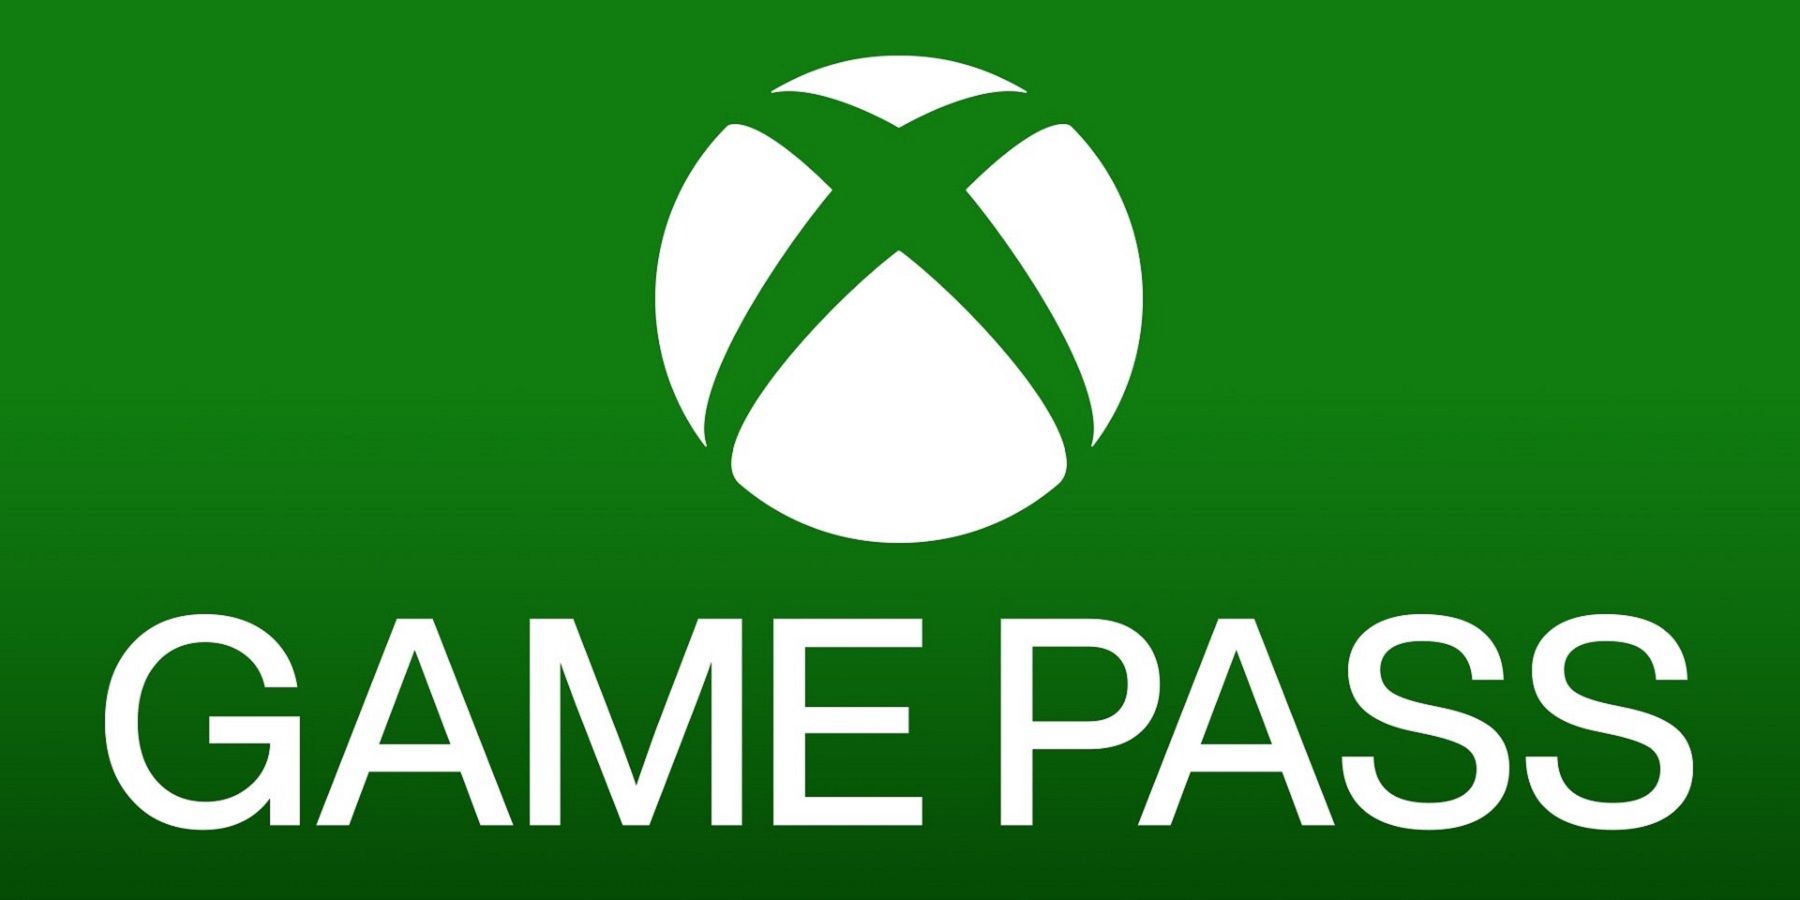 Xbox Game Pass Adds 2 New Games Today, Including Day One Release